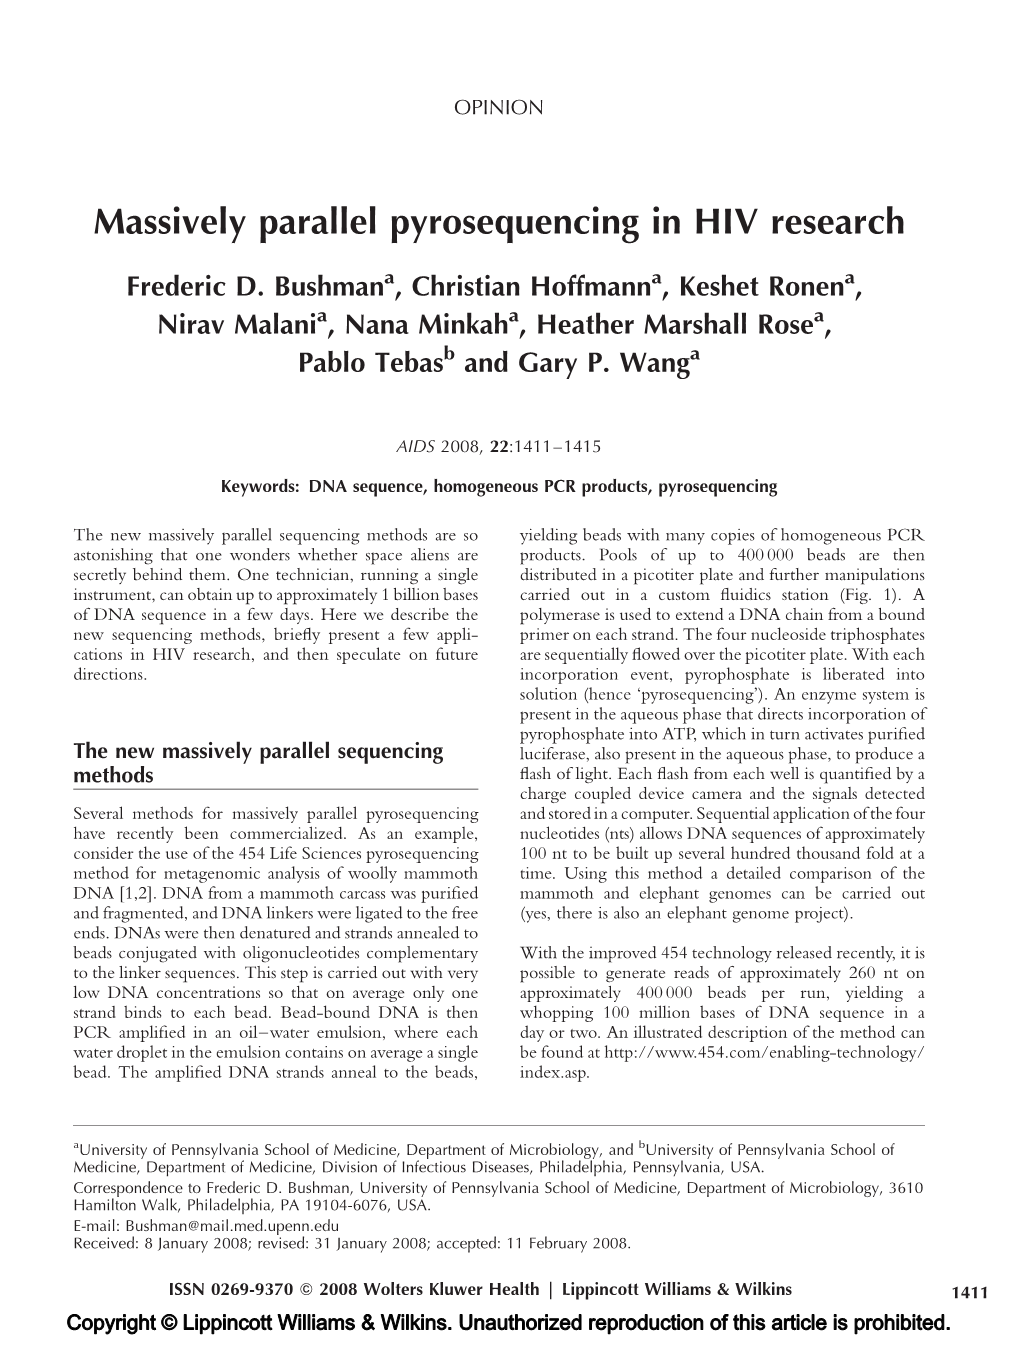 Massively Parallel Pyrosequencing in HIV Research